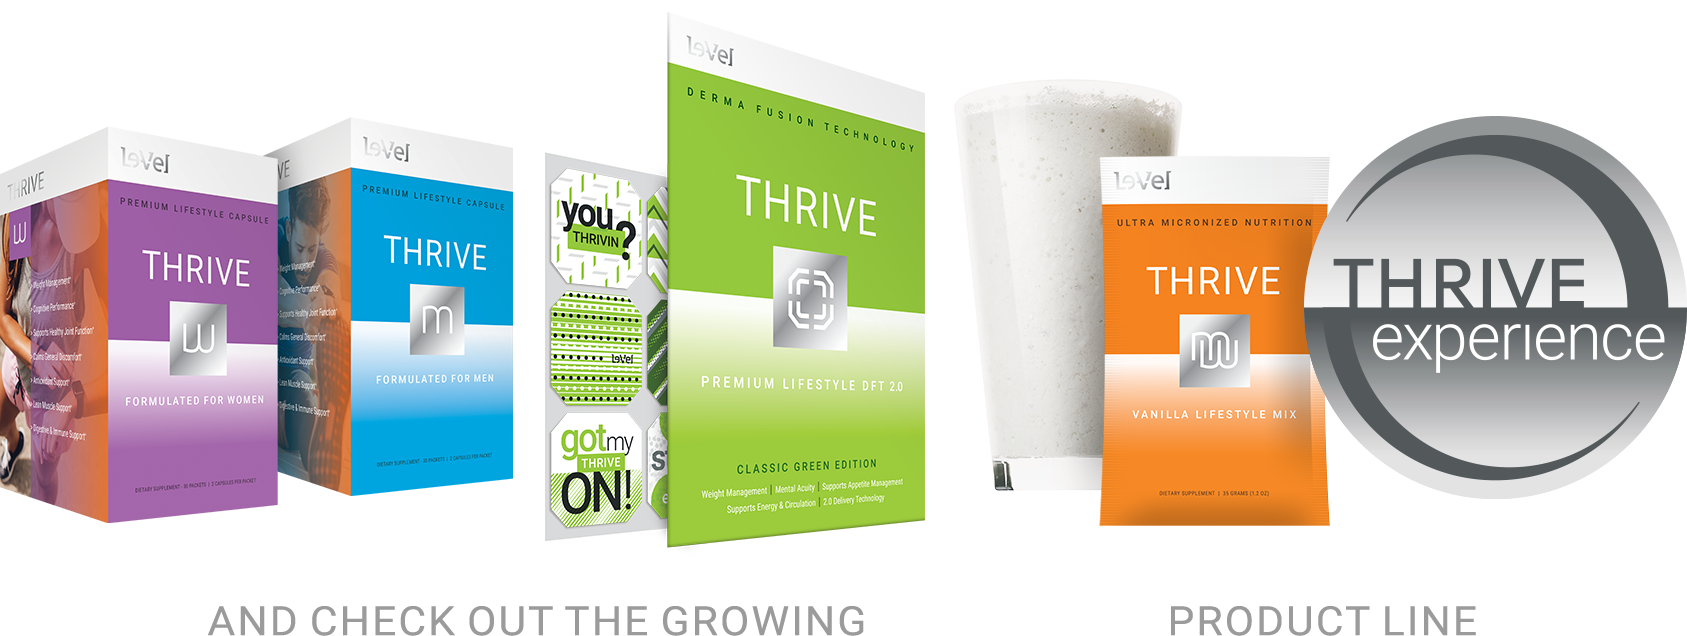 Thrive Product Line